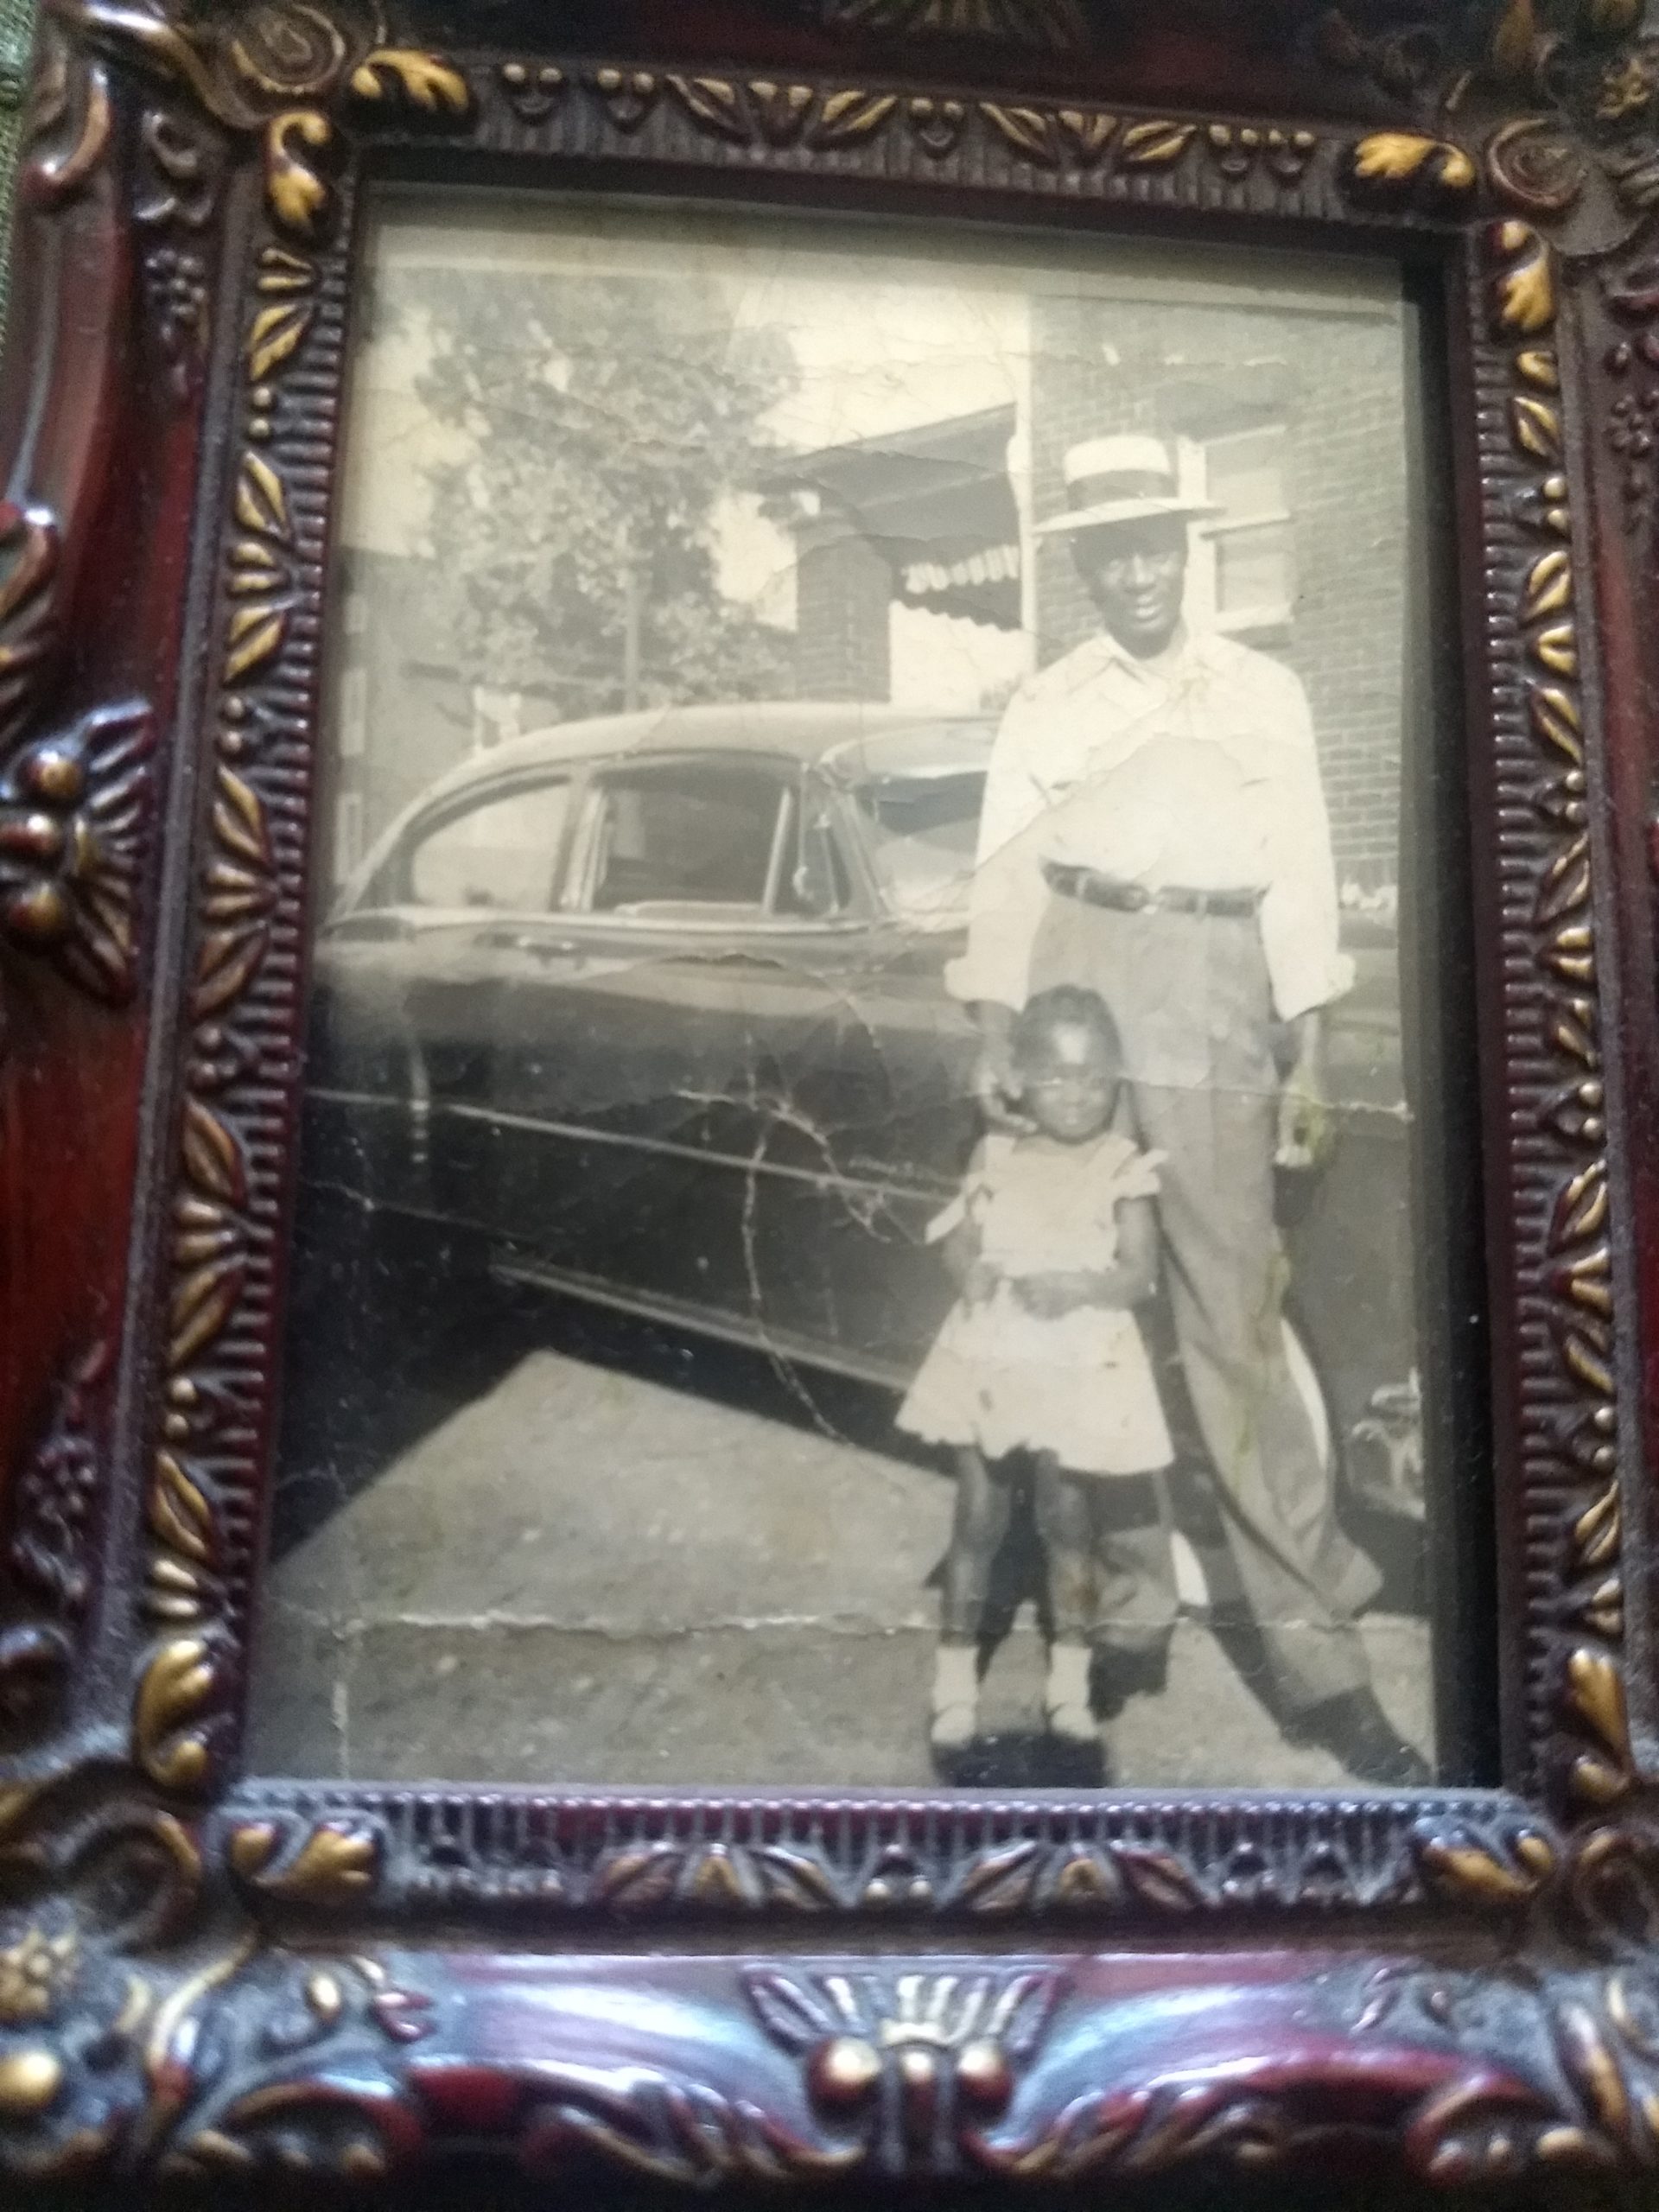 Author Cheryl Charlesworth as a young girl with her father